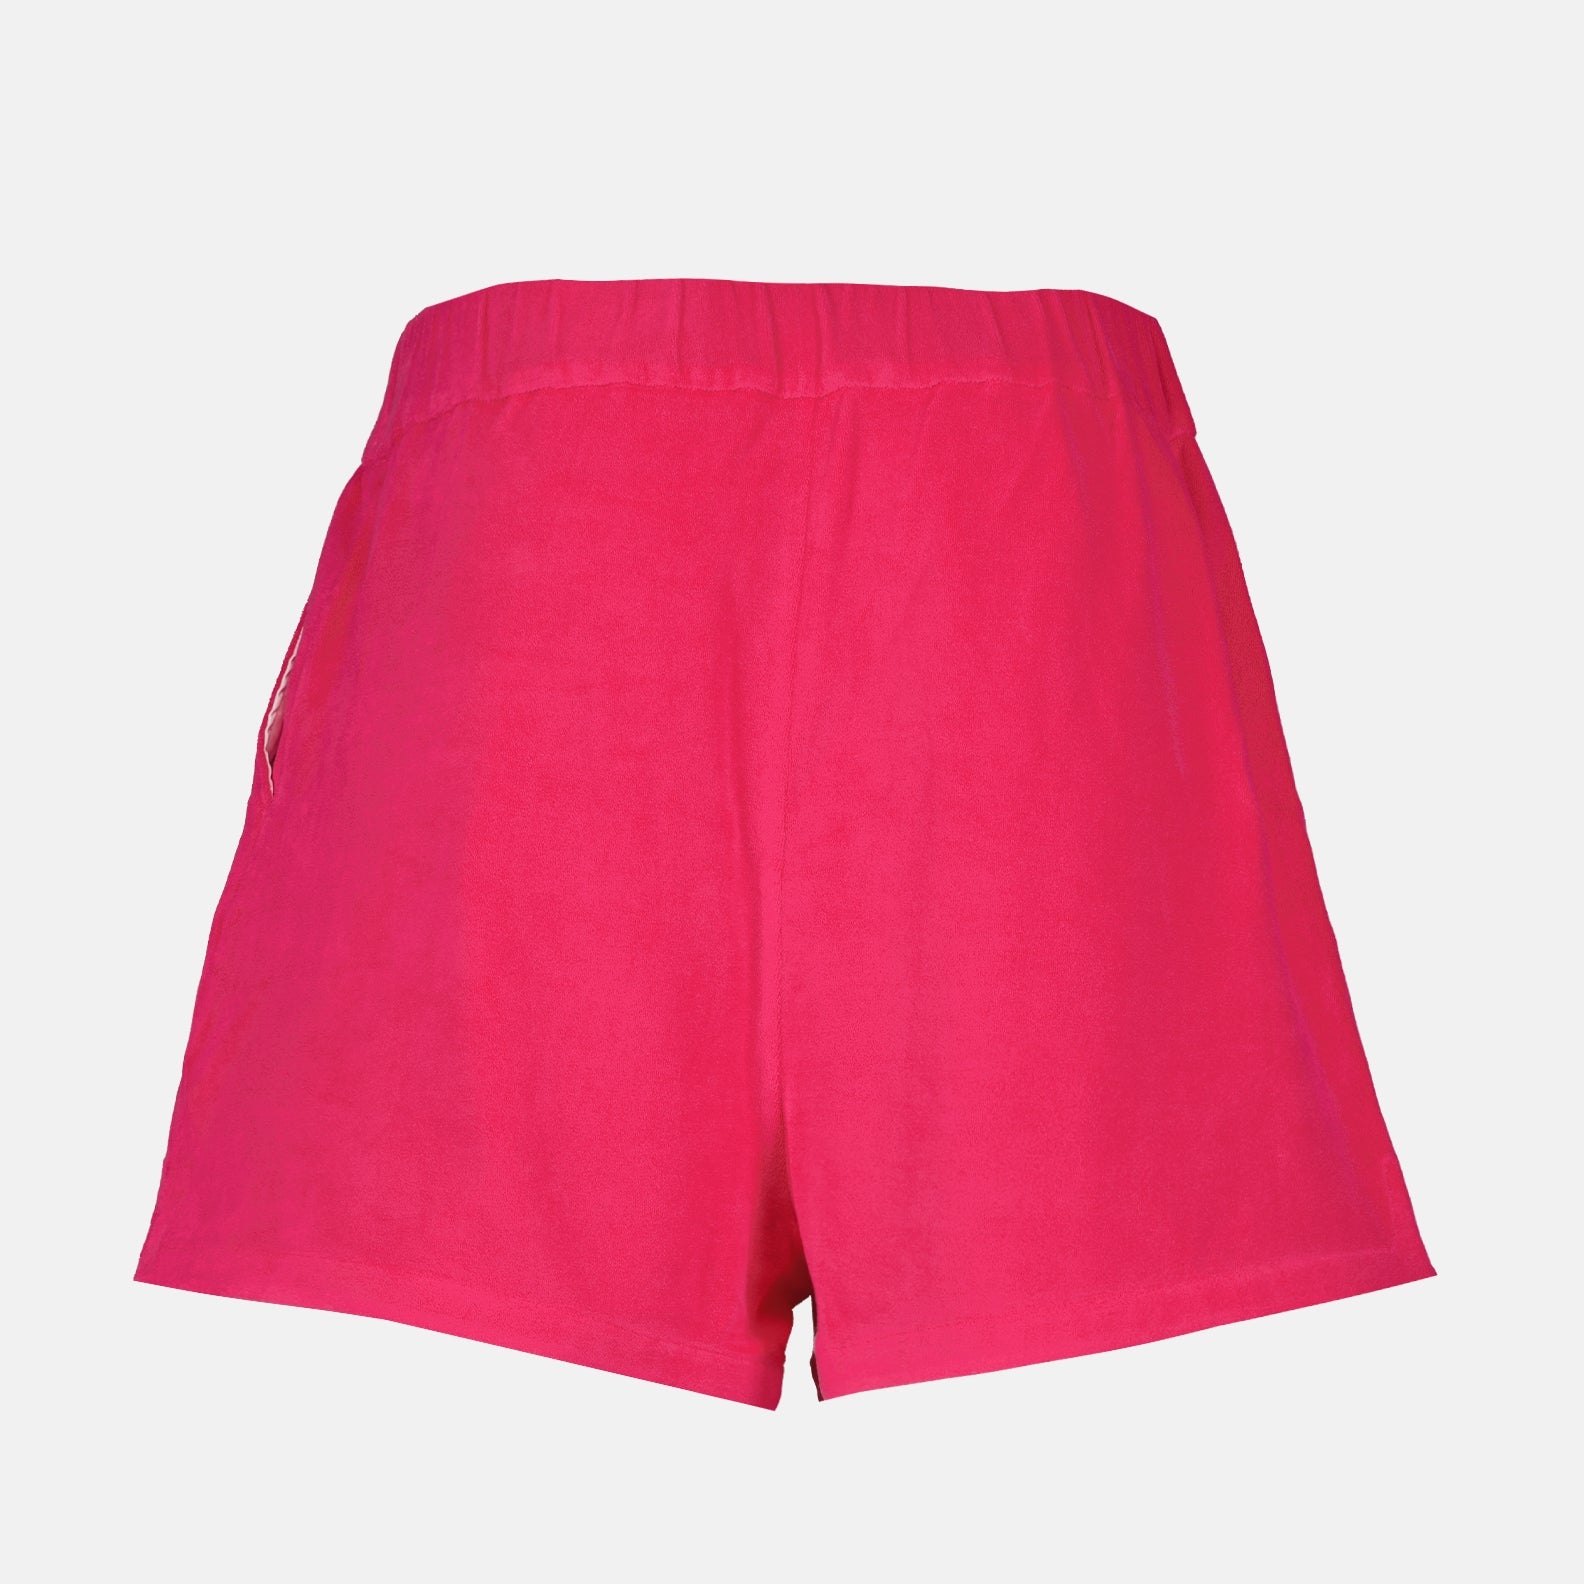 Terry cotton shorts